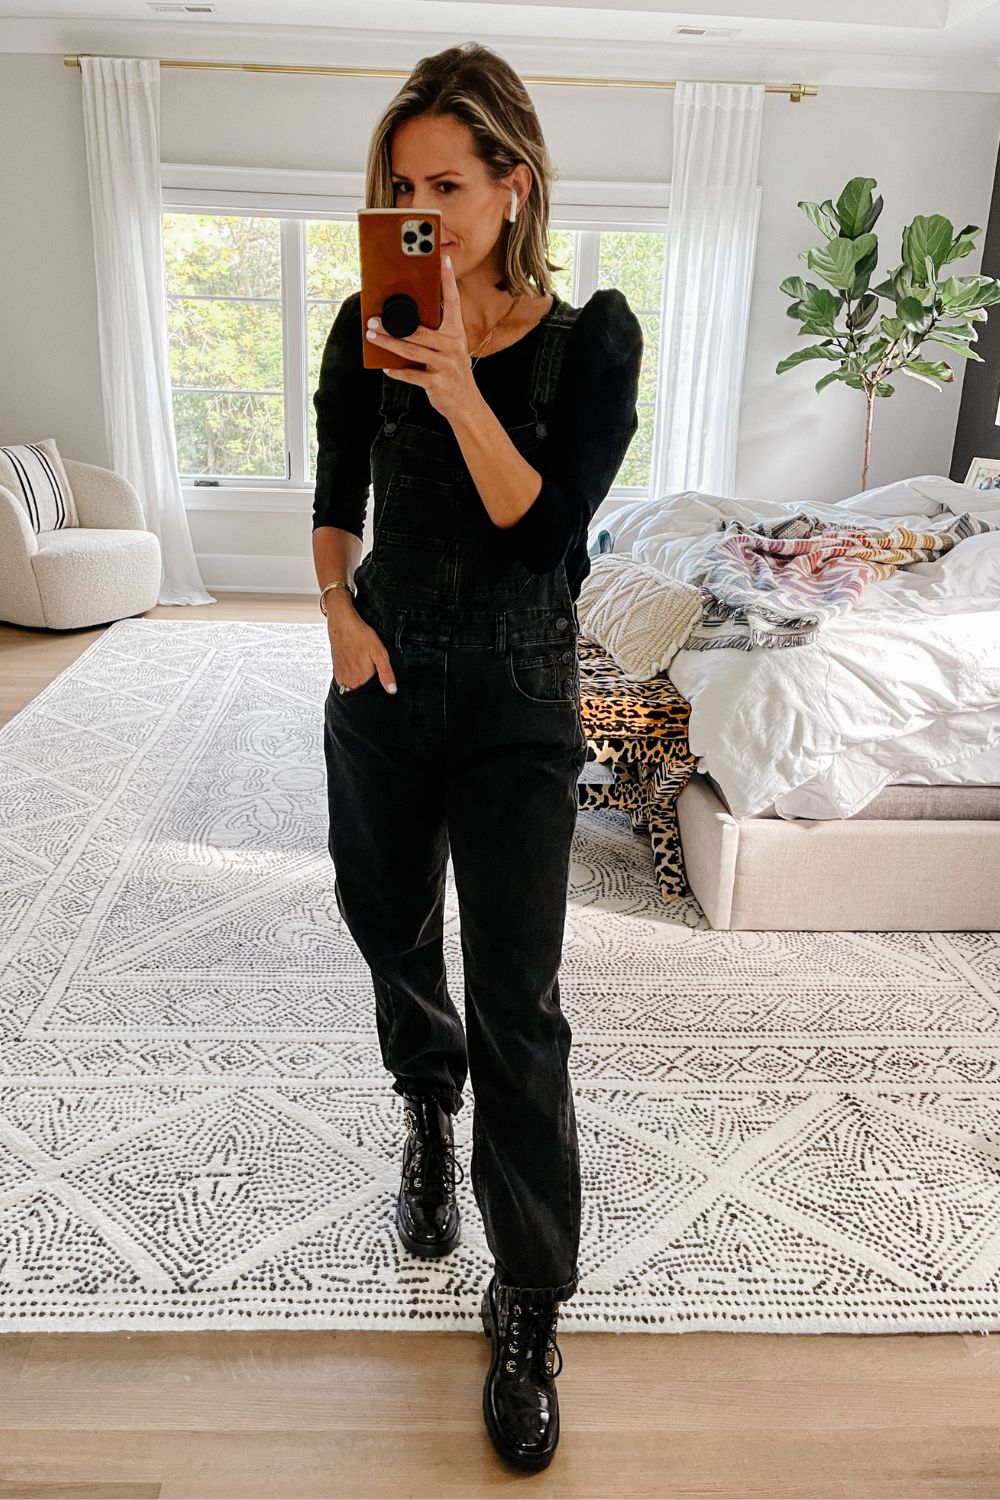 Suzanne wearing a black puff sleeve top, black overalls, and combat boots